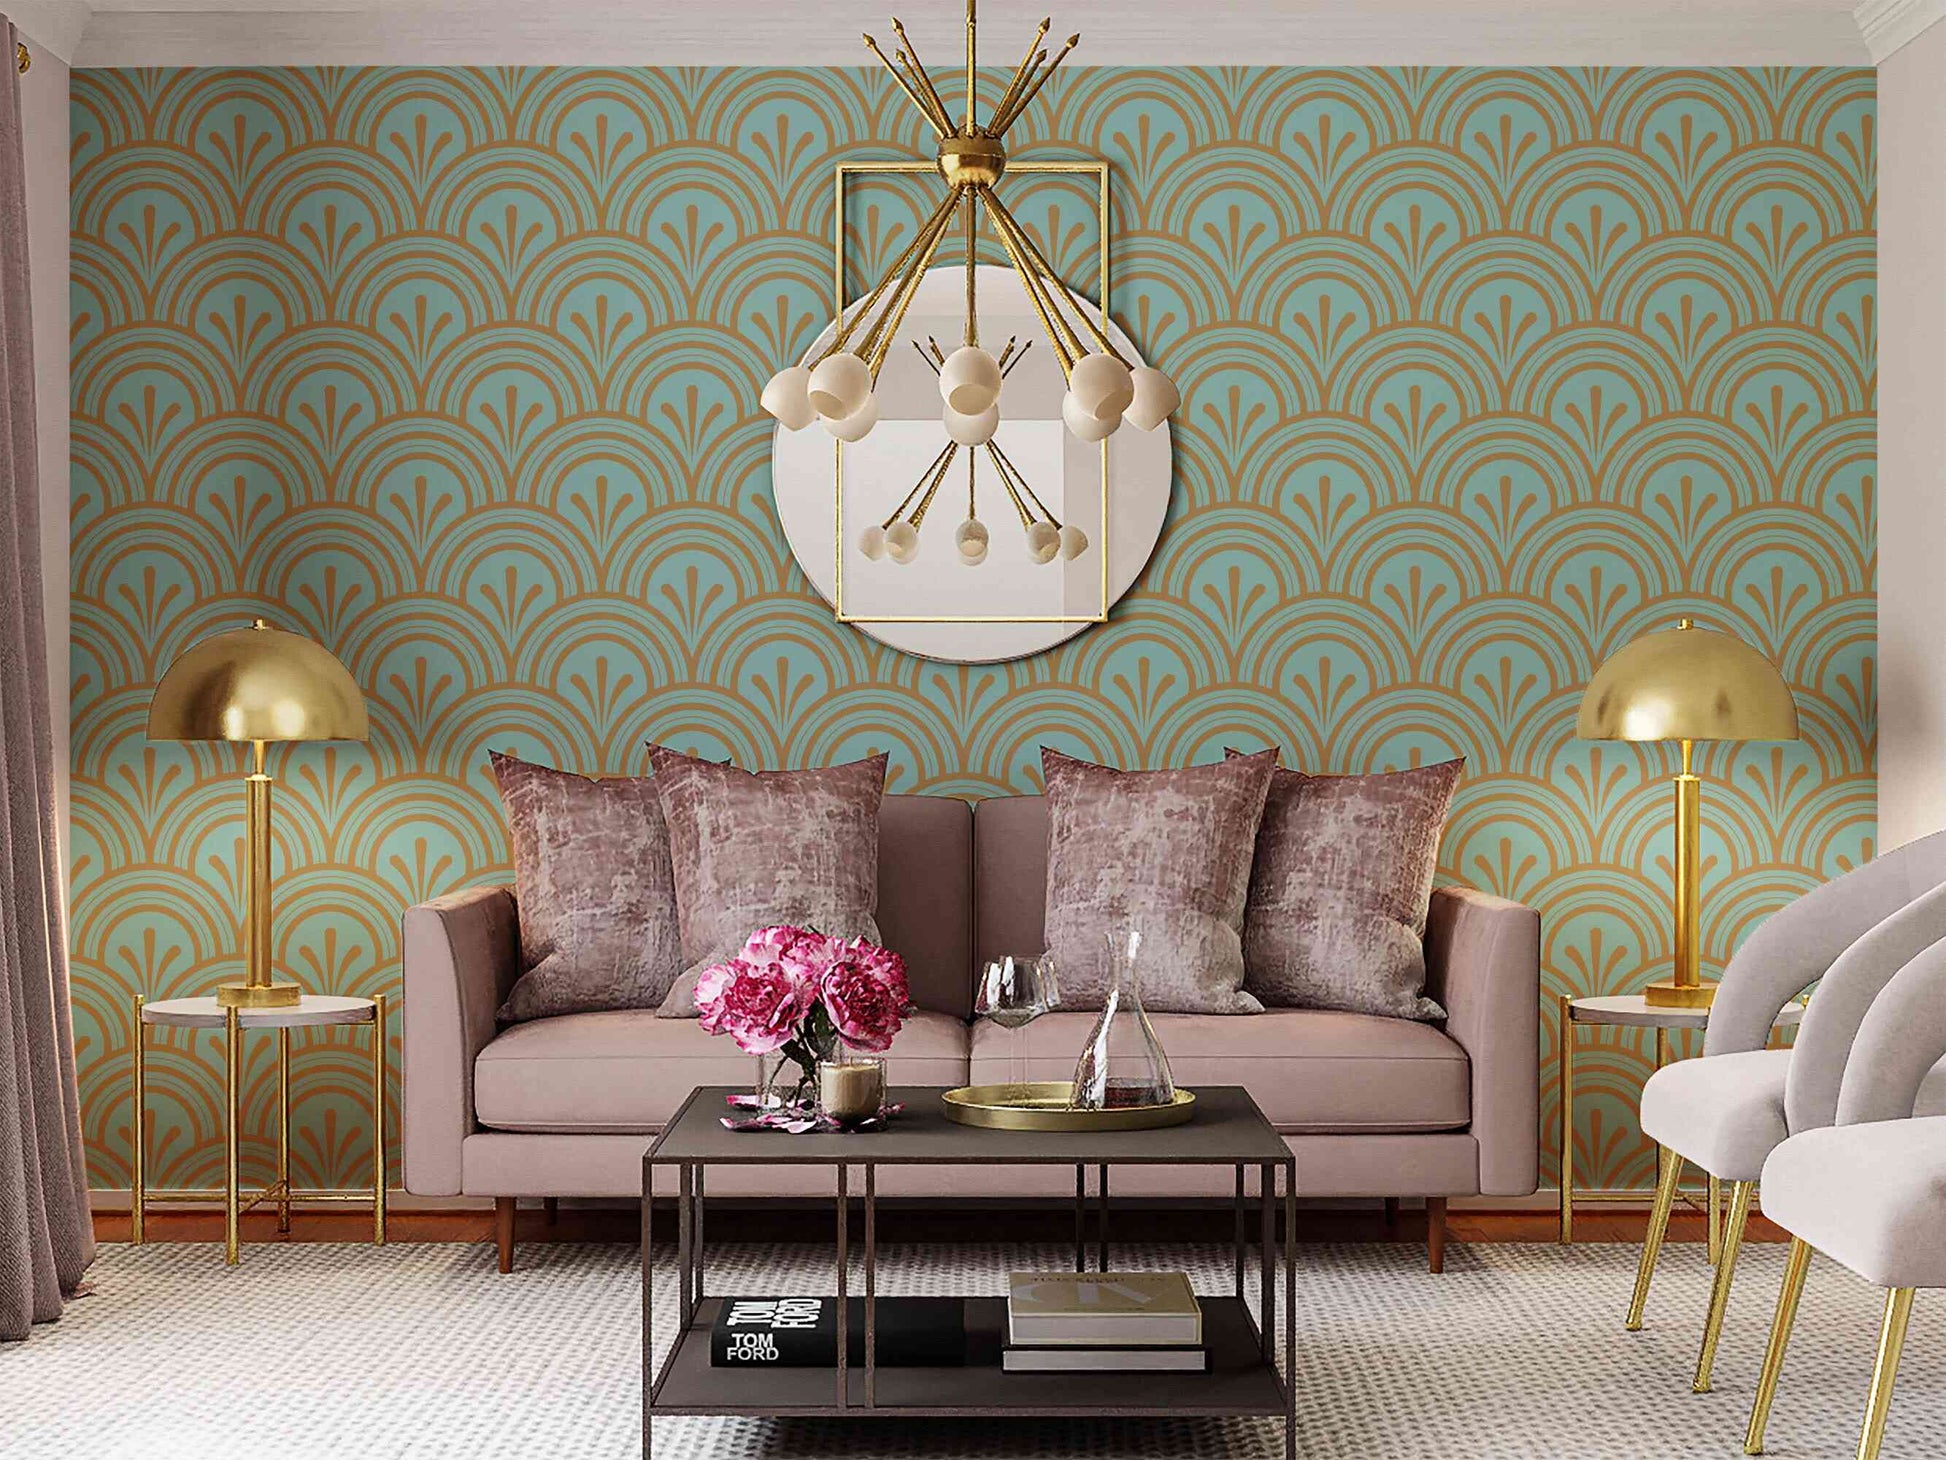 Glamour Pattern Wallpaper adding a touch of elegance and sophistication.